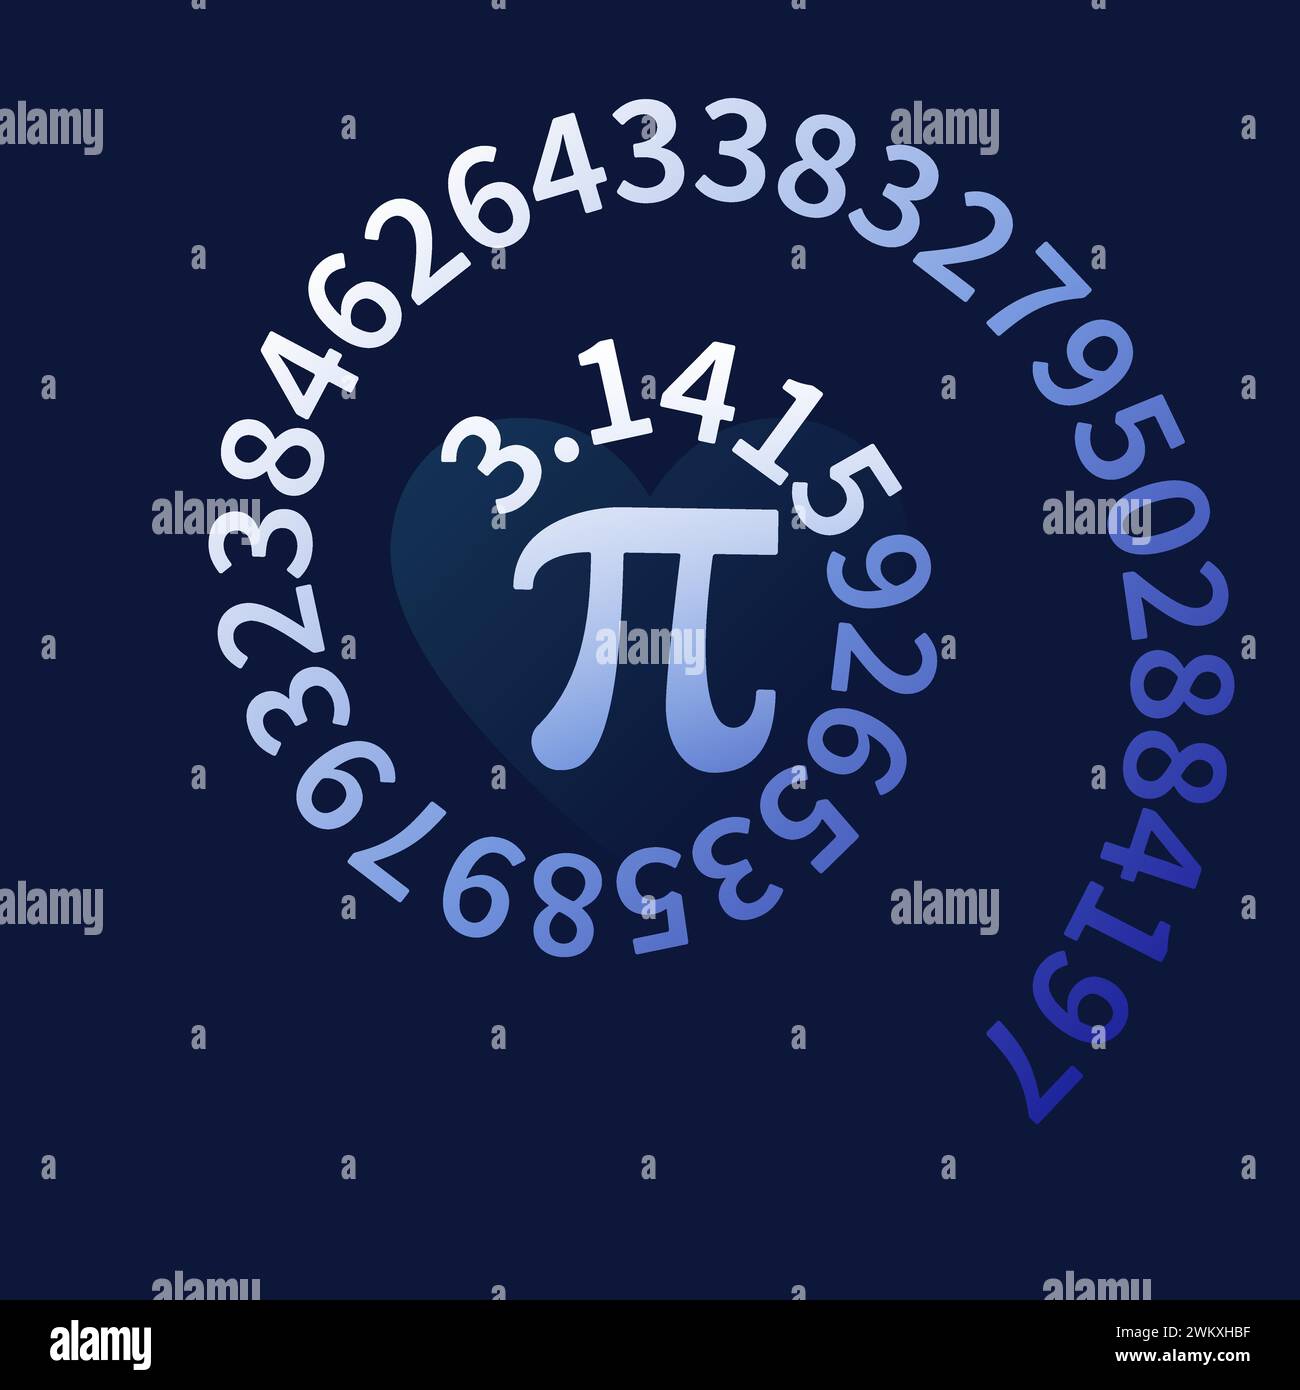 3,14 Spiral vector illustration. Pi Day Holiday concept blue background with Greek letter and numbers symbols Stock Vector